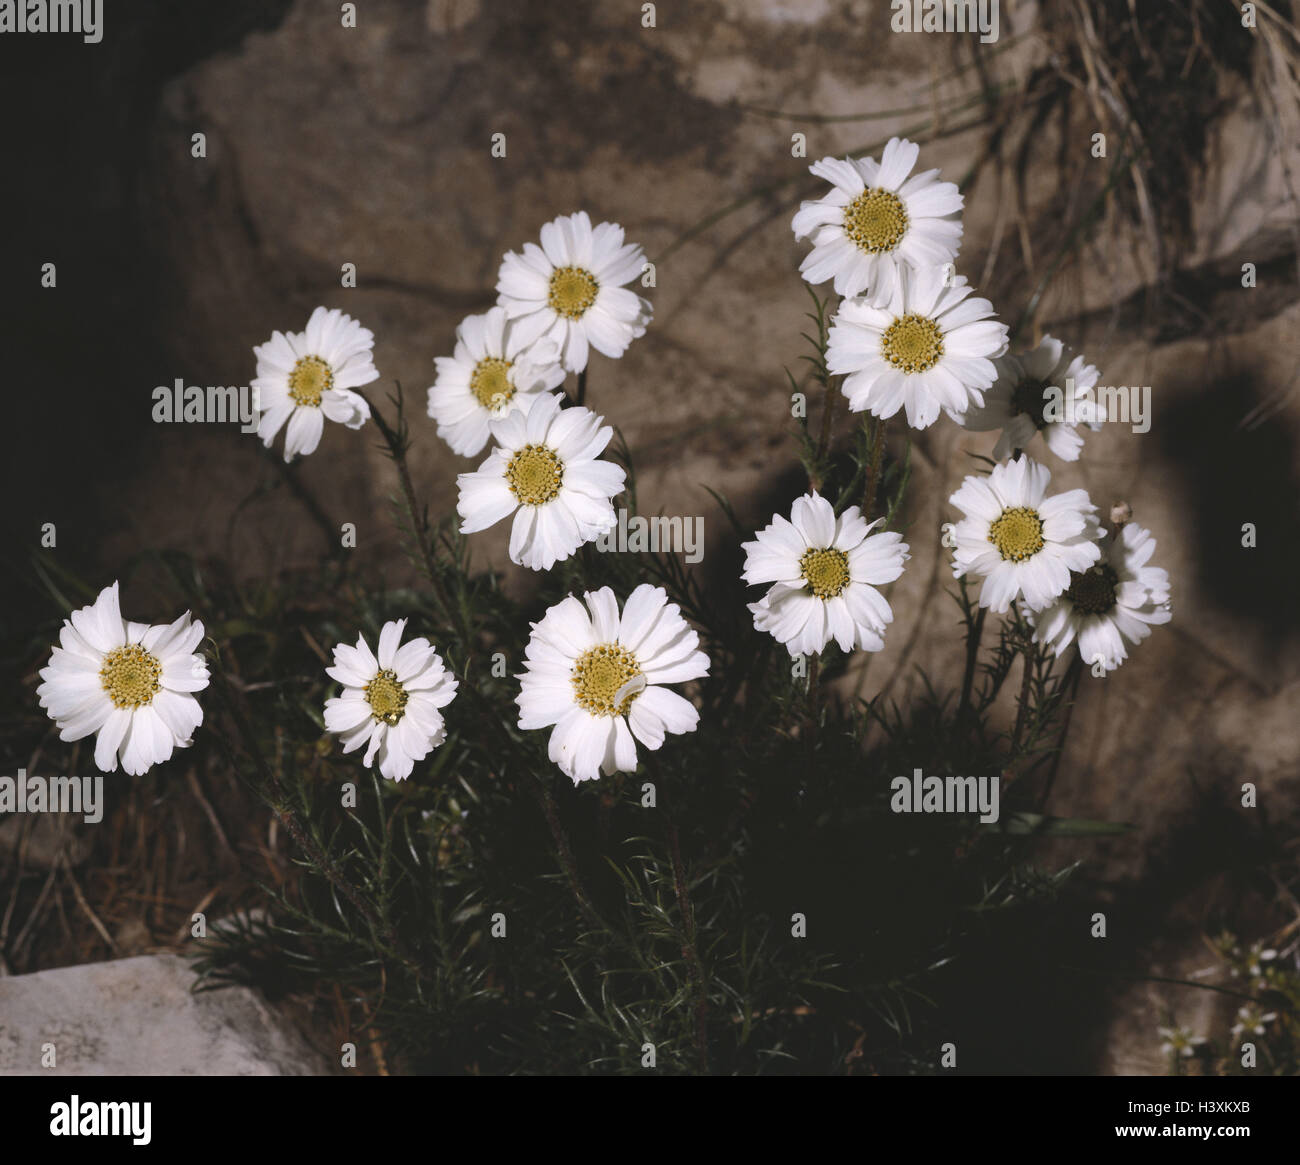 Dolomiten-Schafgarbe, Achillea oxyloba, blossoms, close up, nature, botany, flora, plants, flowers, Alpine flowers, Alpine flora, Schafgarbe, wicker blossom plants, Compositae, blossom, white, period bloom, from June to September, Stock Photo